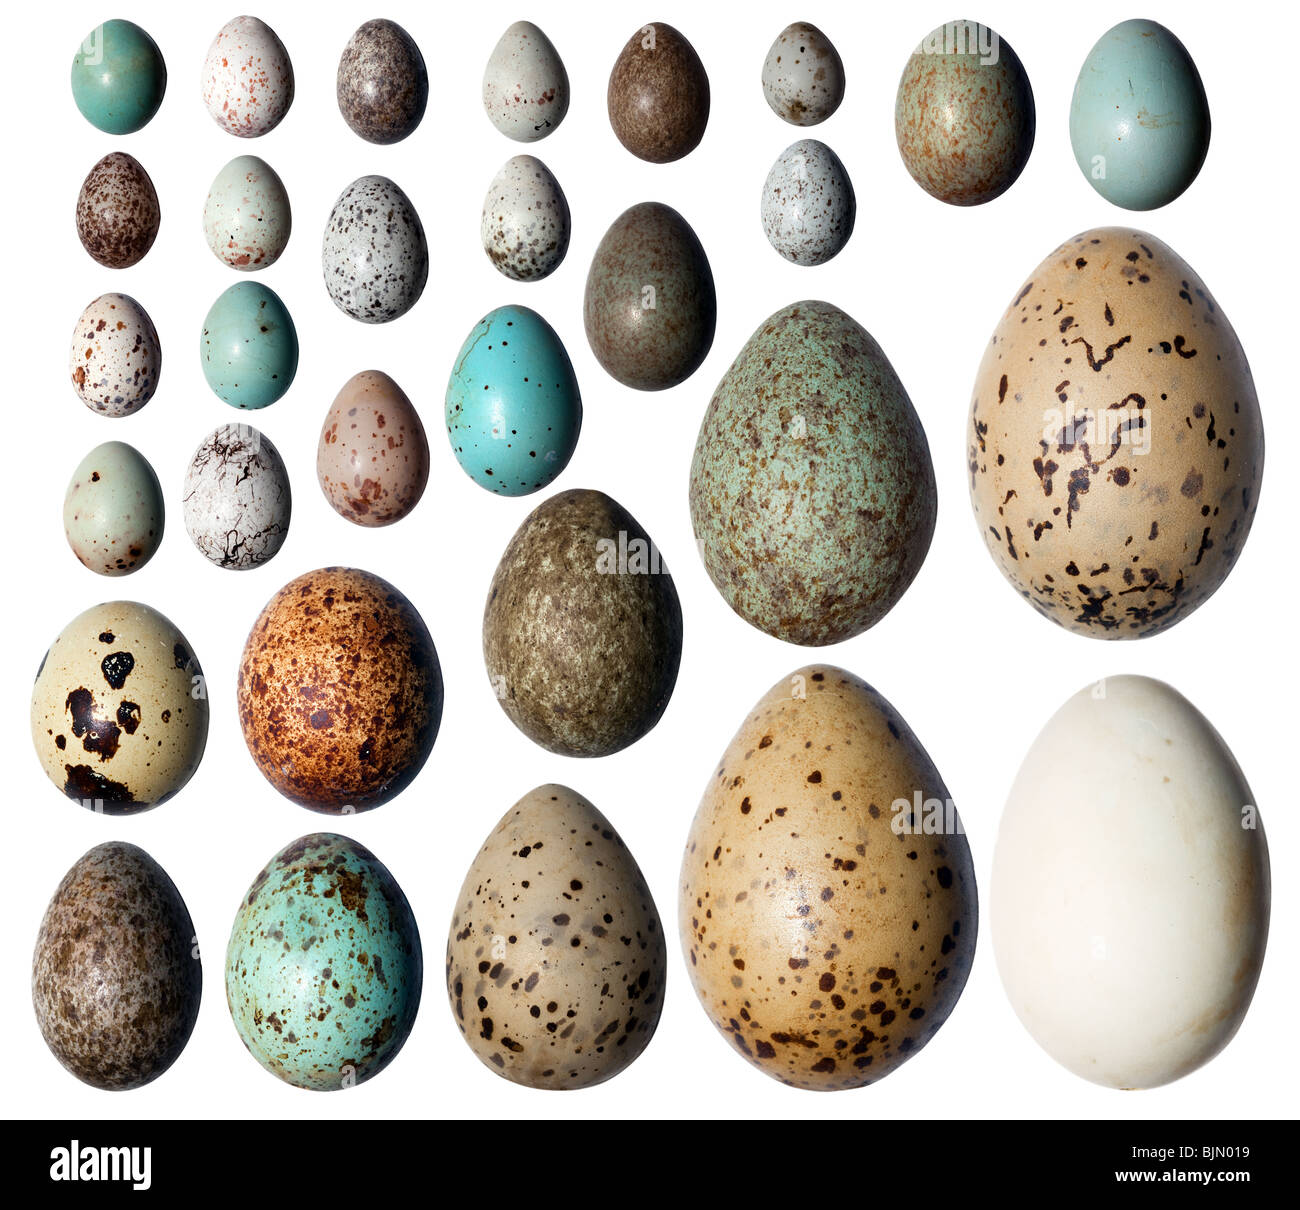 Eggs of birds in front of white background. Stock Photo